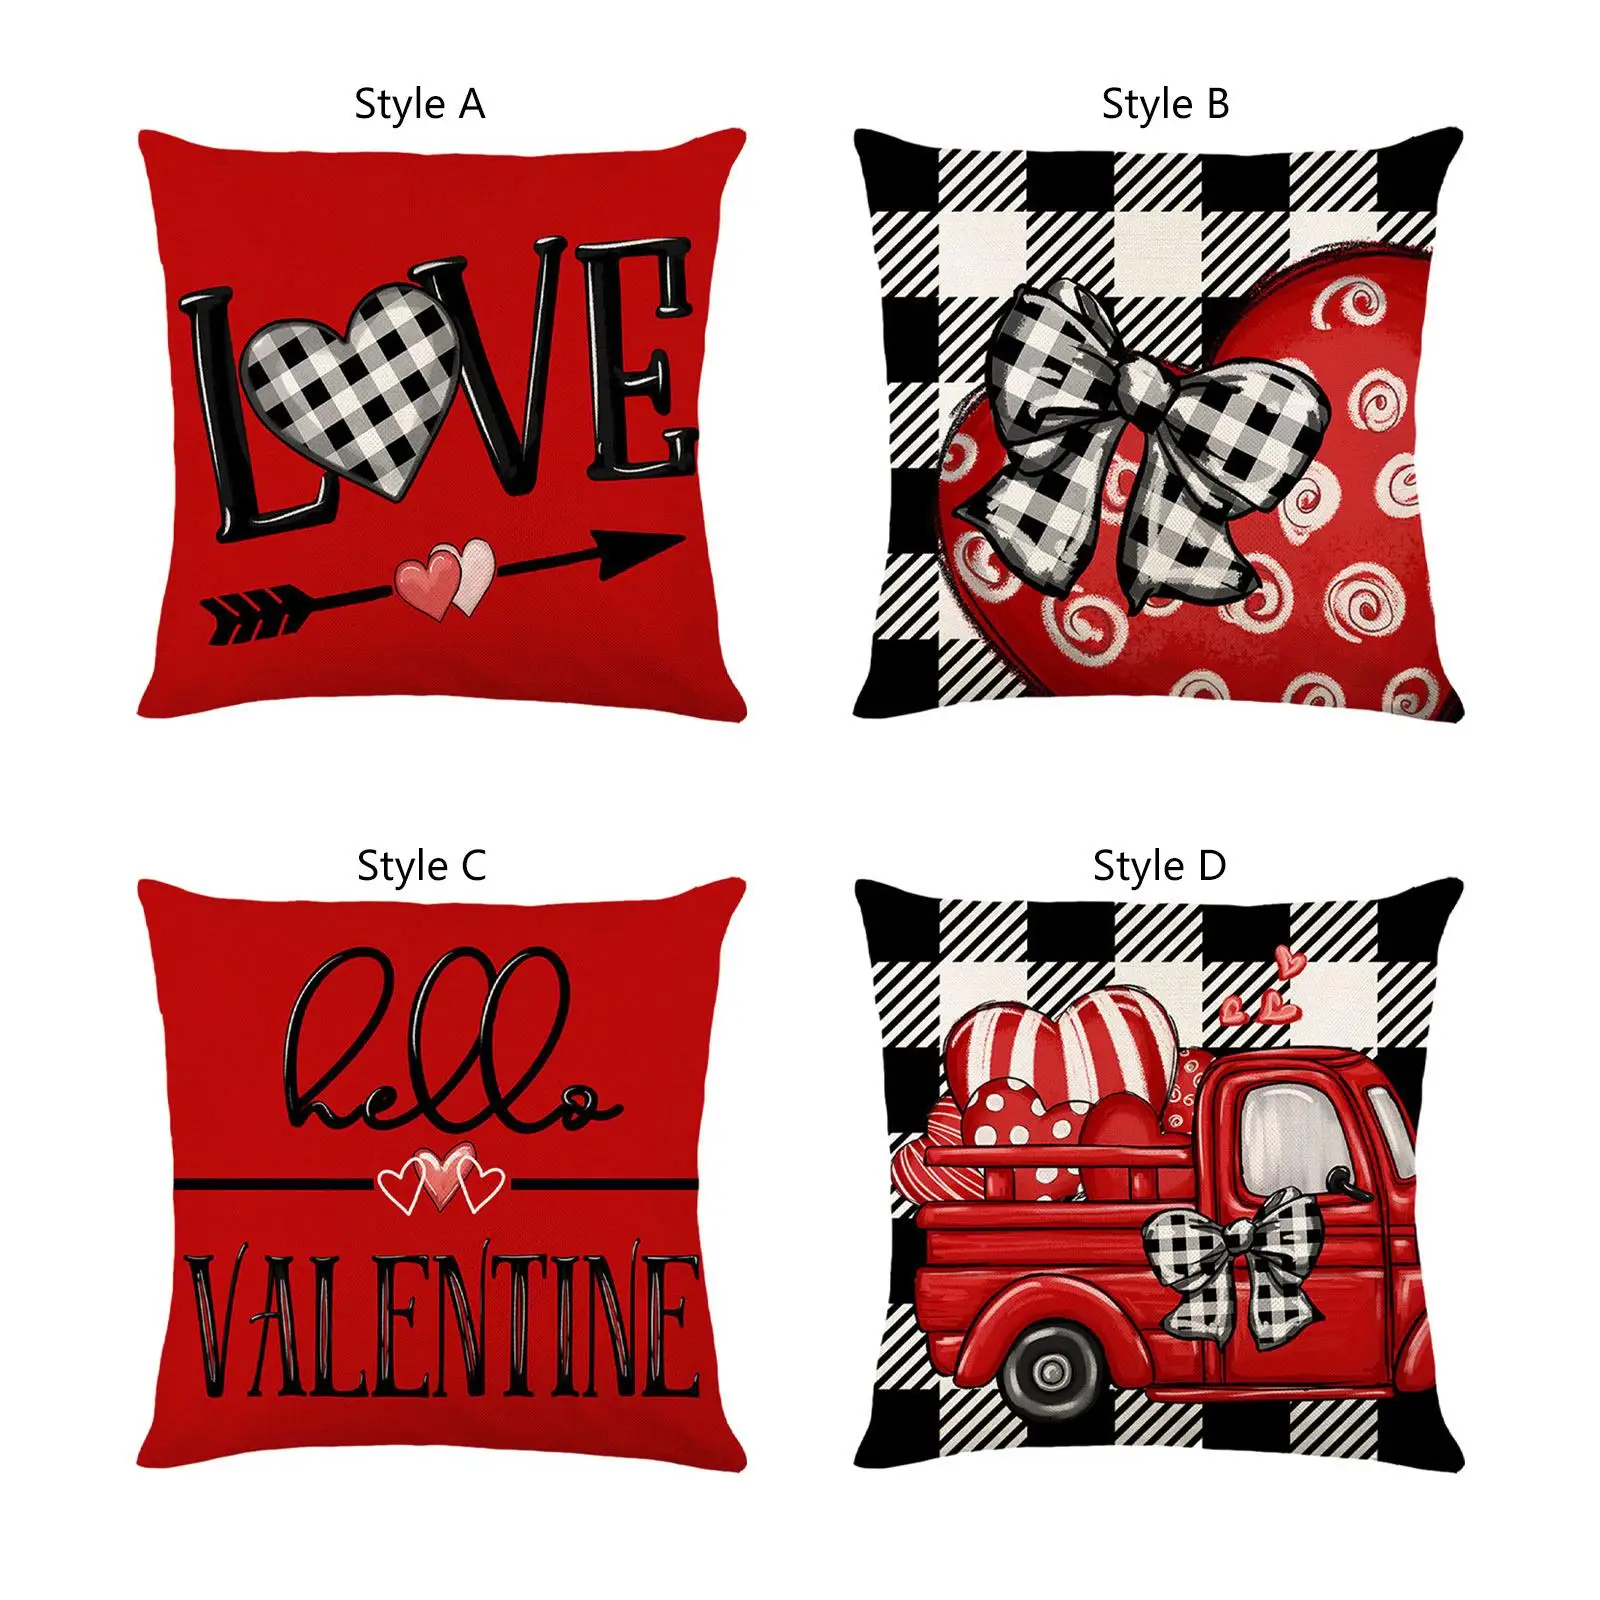 Valentines Day Pillow 45x45cm Comfortable Valentines Day Gifts Zippered Love Heart Pattern for Toss Chair Farmhouse Sofa Bedding